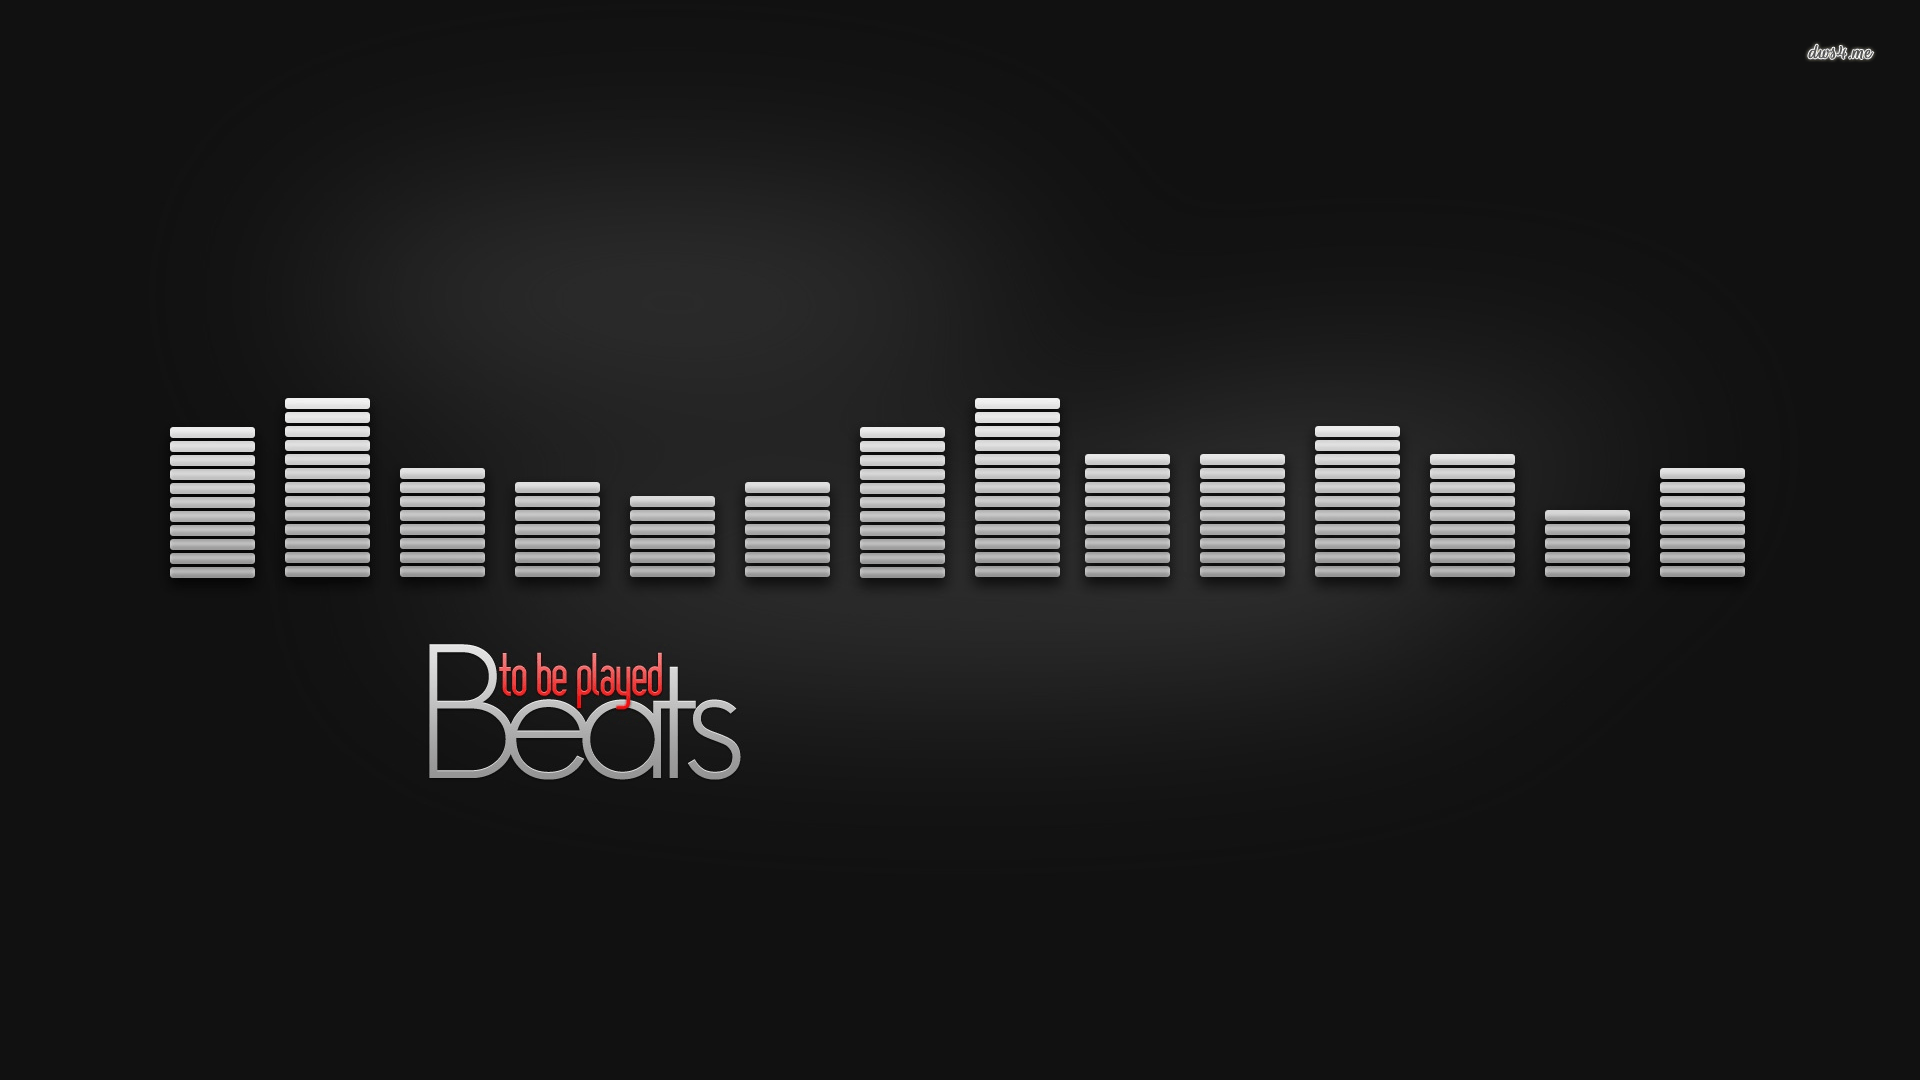 Beats by Dre wallpapers